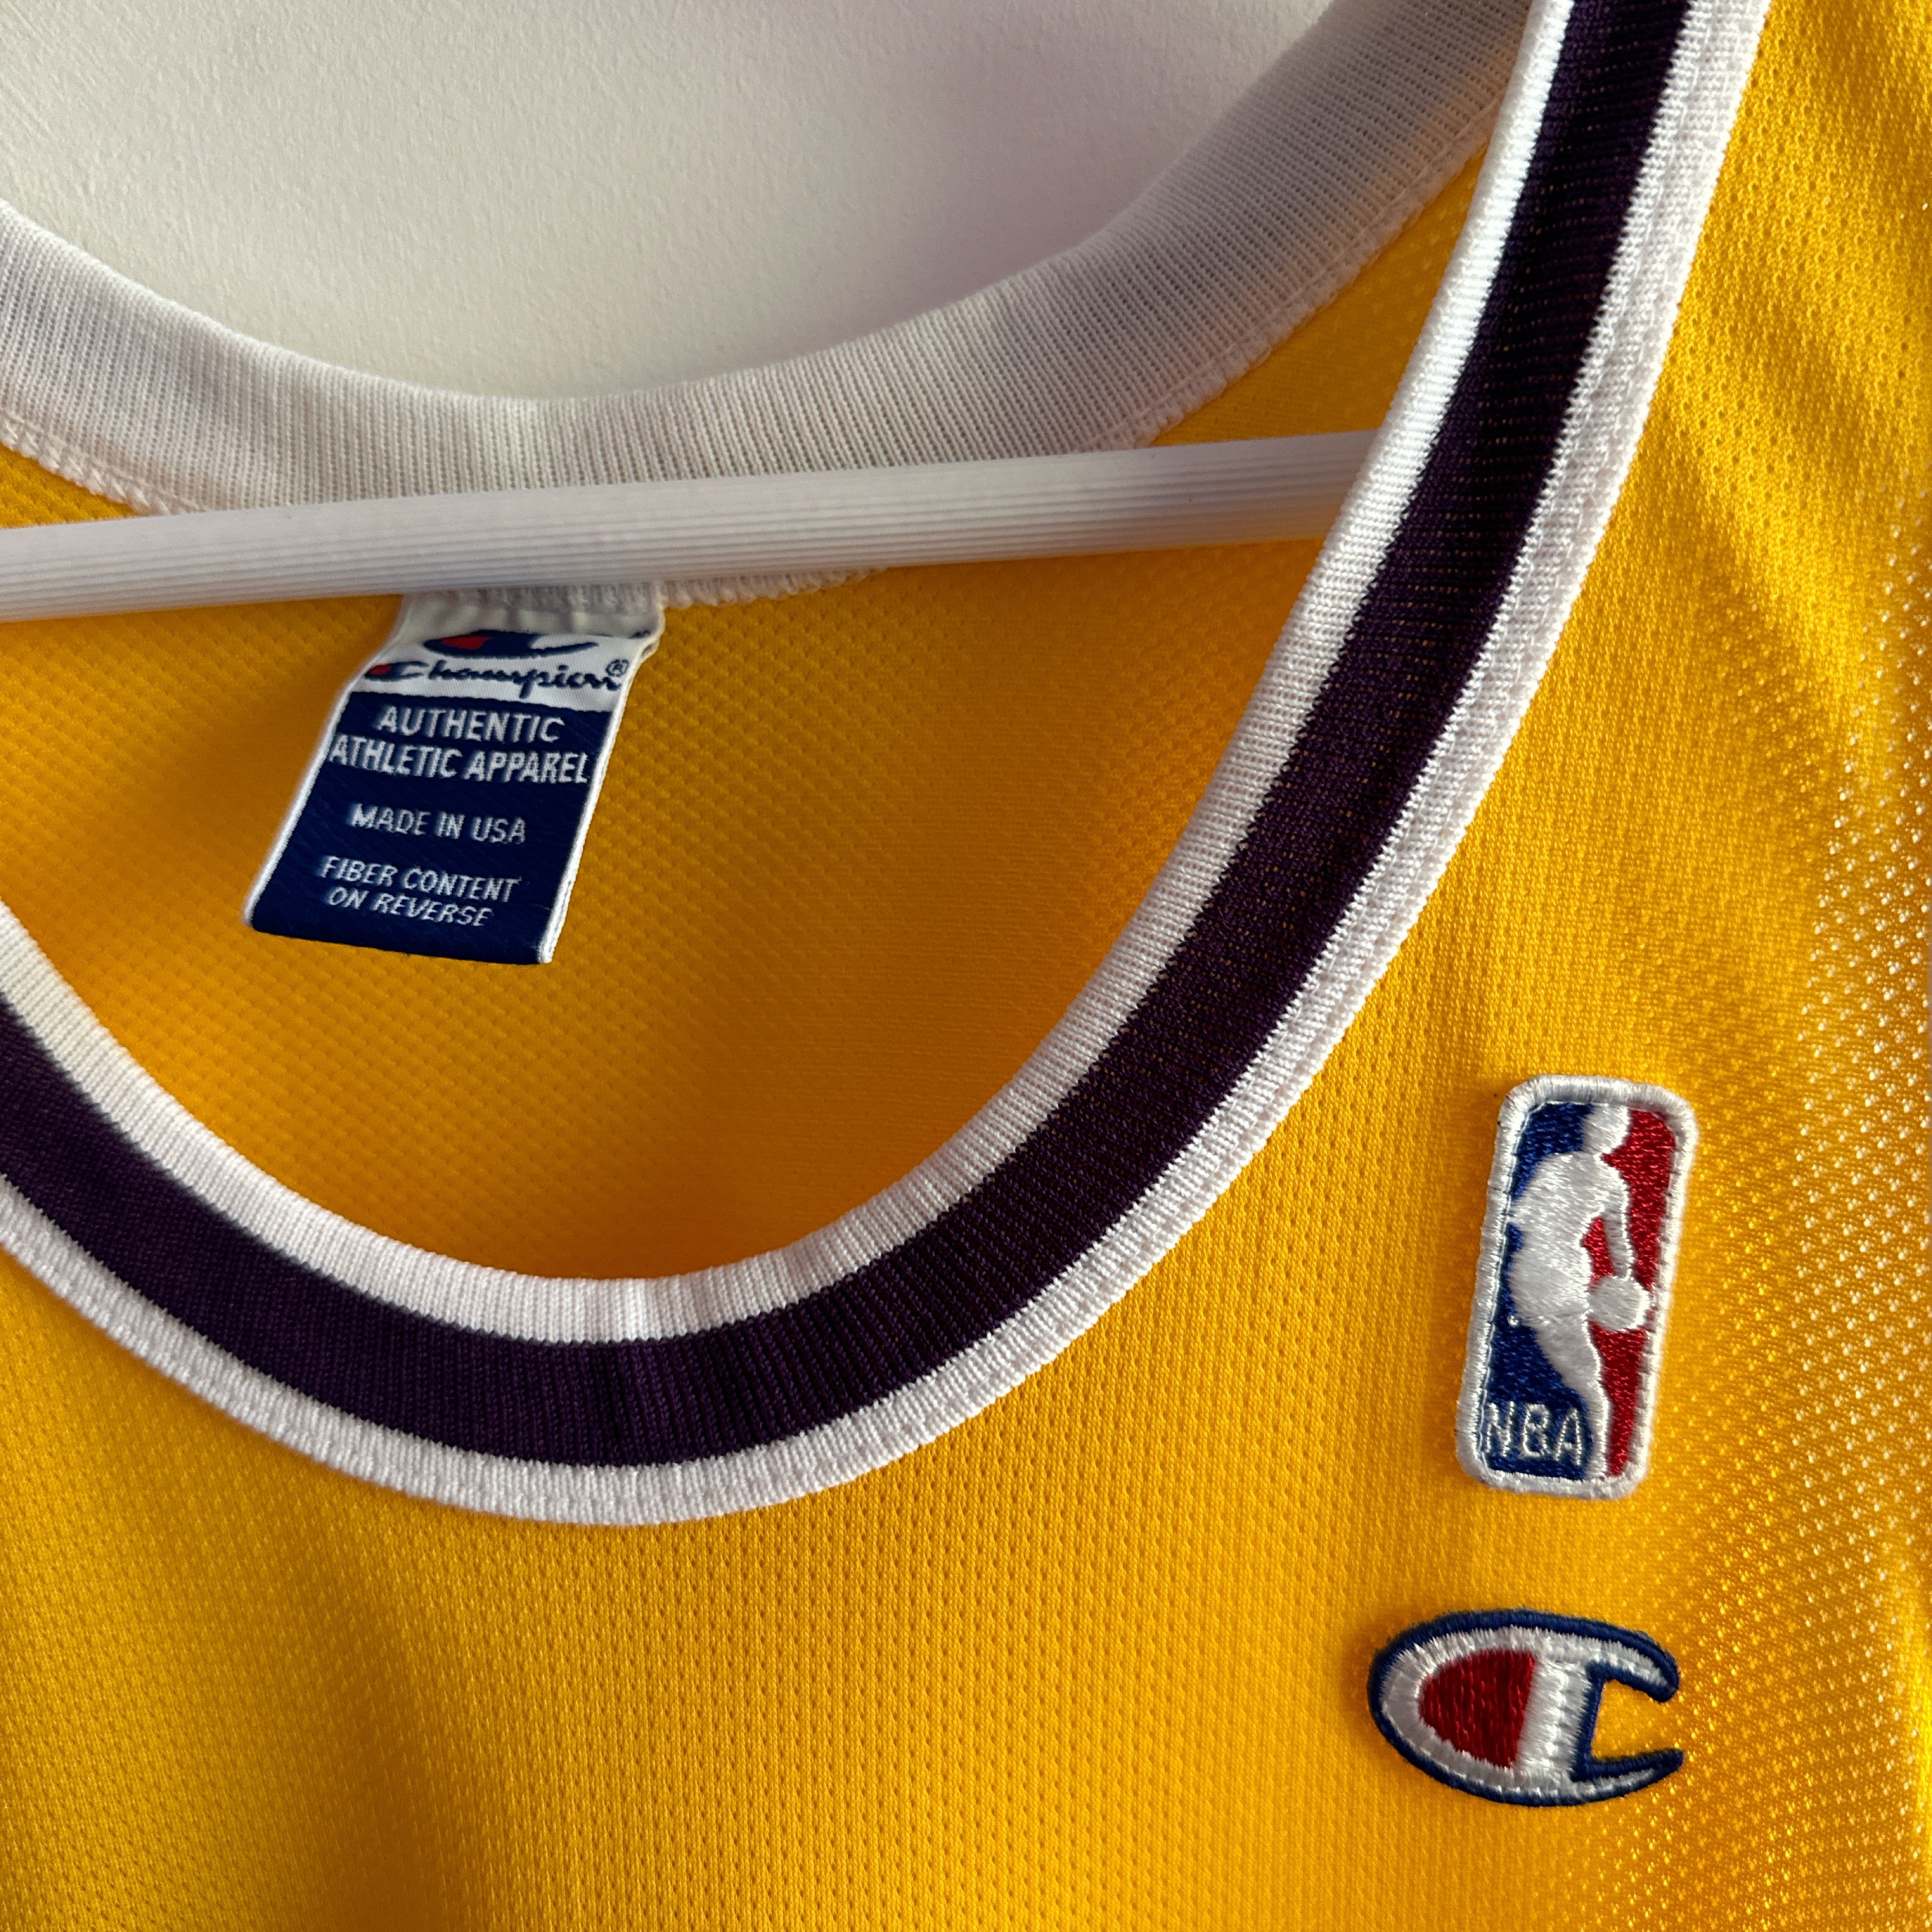 Los Angeles Lakers Shaquille O’Neal Champion jersey - Small